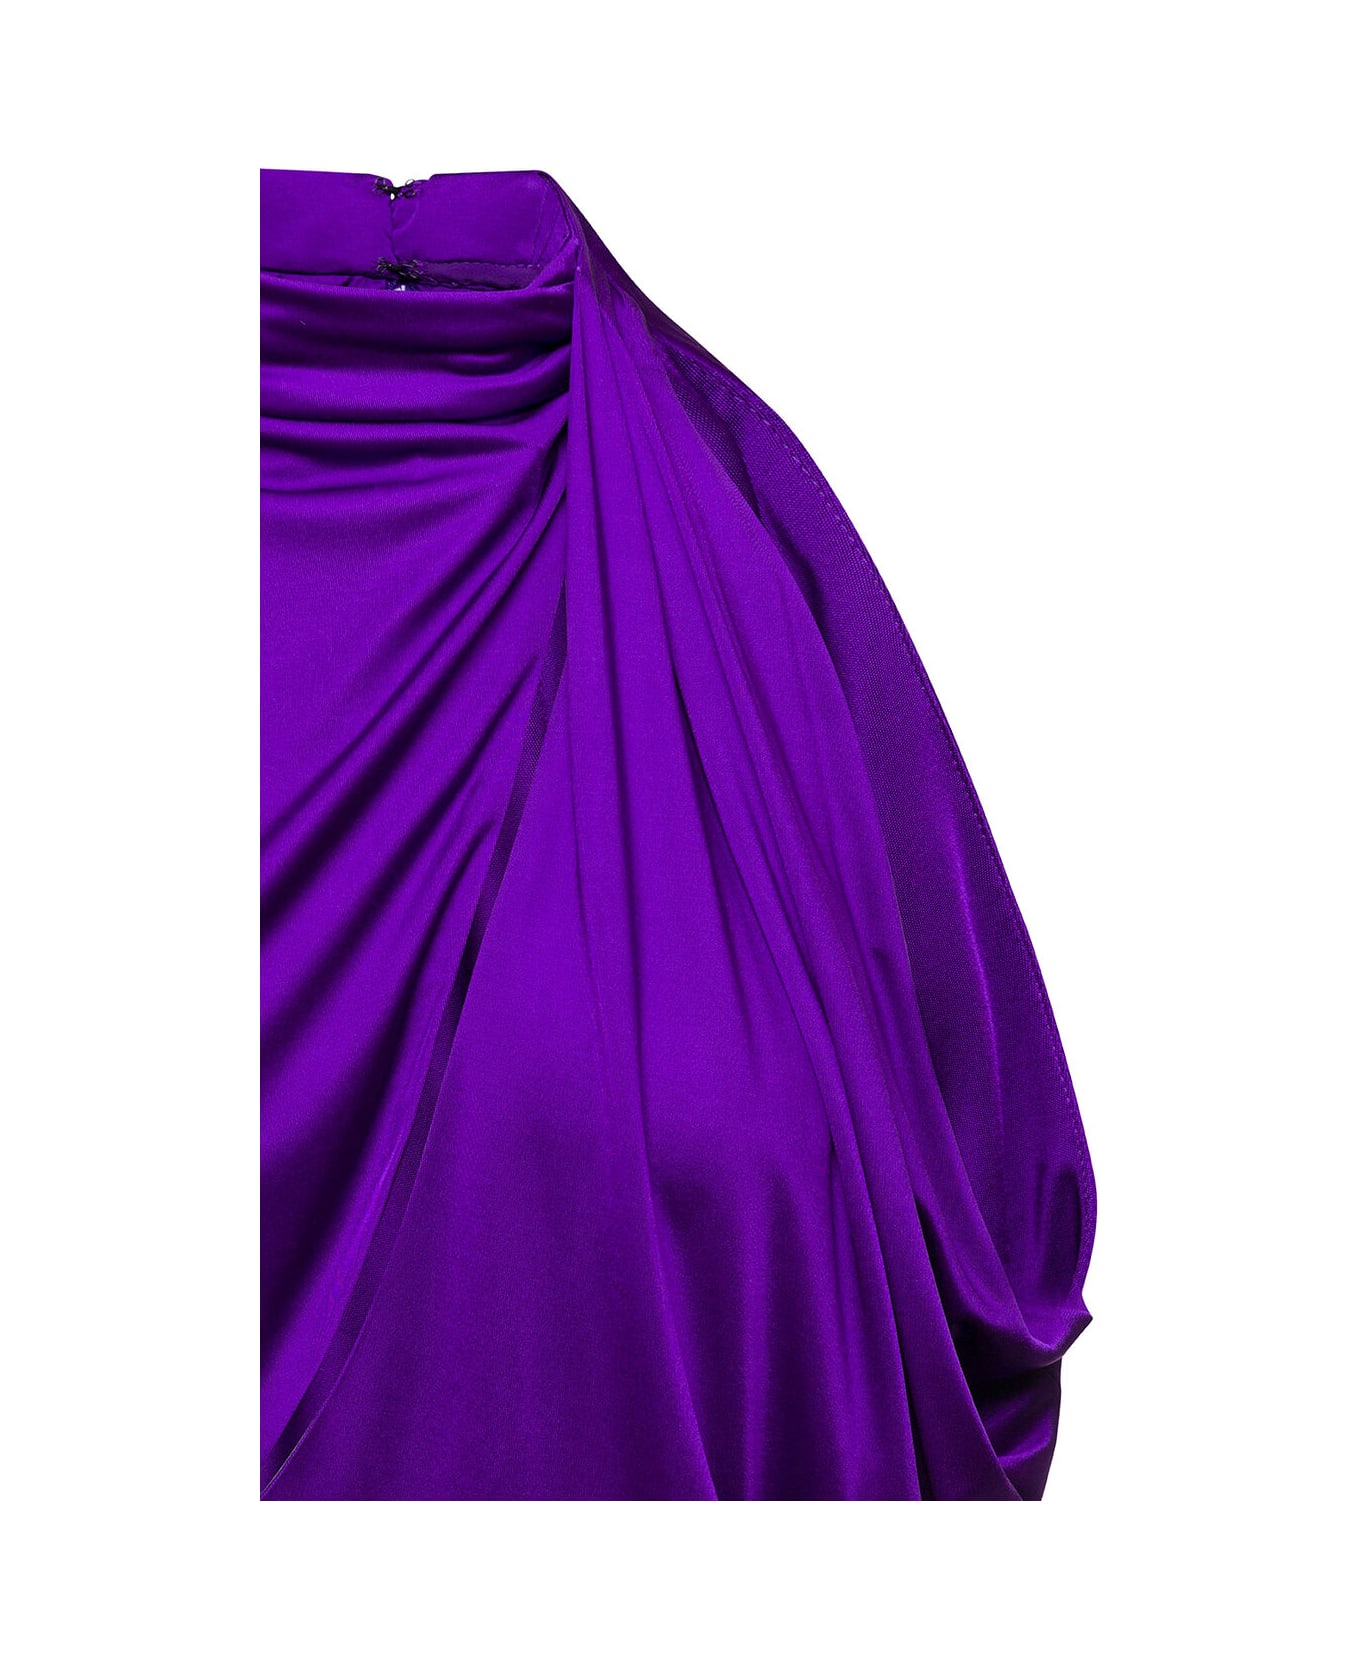 Versace Purple Halterneck Top With Diagonal Cut-out In Viscose Woman - Violet